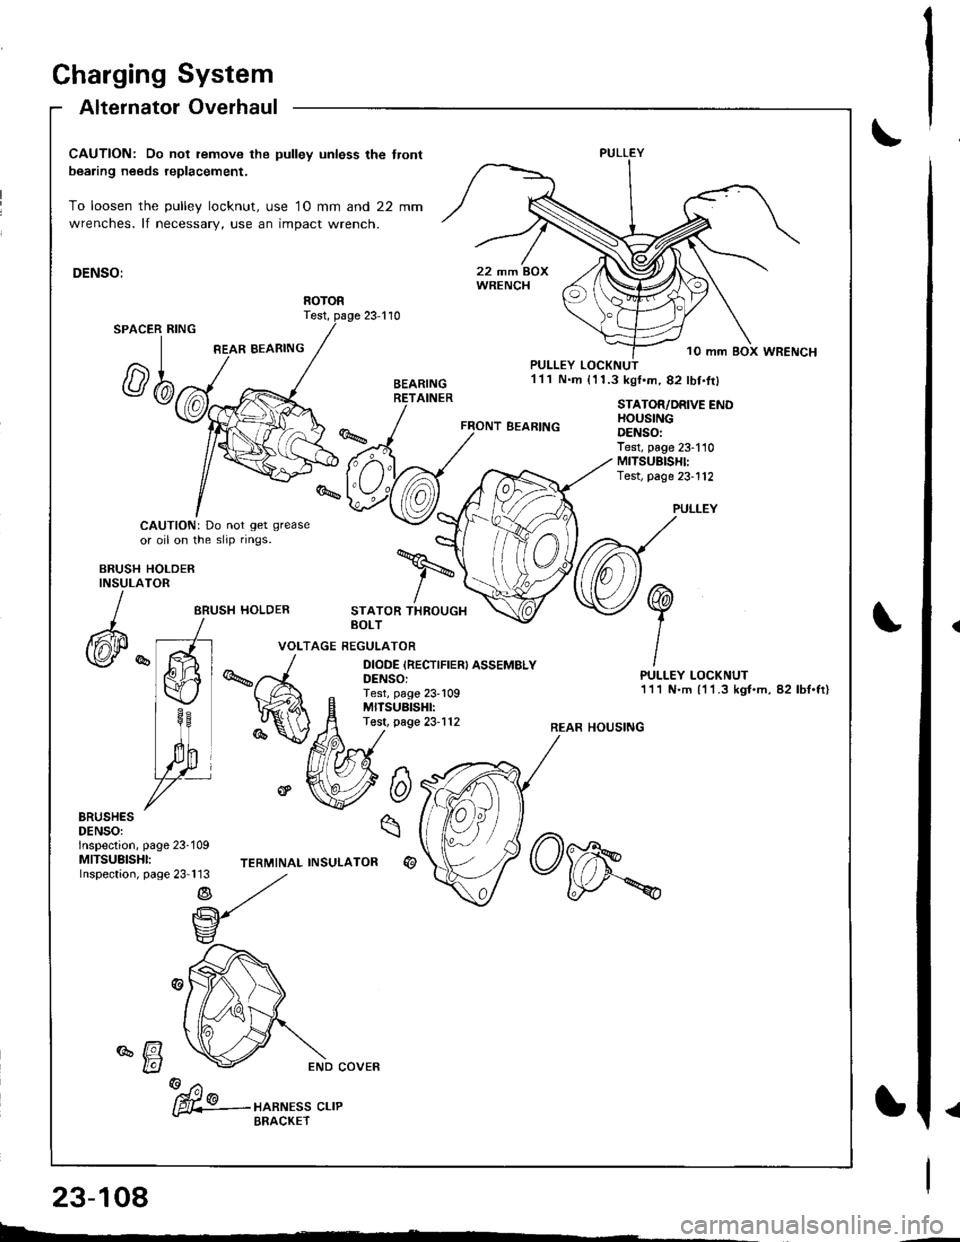 HONDA INTEGRA 1998 4.G Owners Manual Charging System
Alternator Overhaul
CAUTION: Do not remove the pulley unless the tront
bearing needs replacement.
To loosen the pulley locknut, use 10 mm and 22 mm
wrenches. lf necessary, use an impac